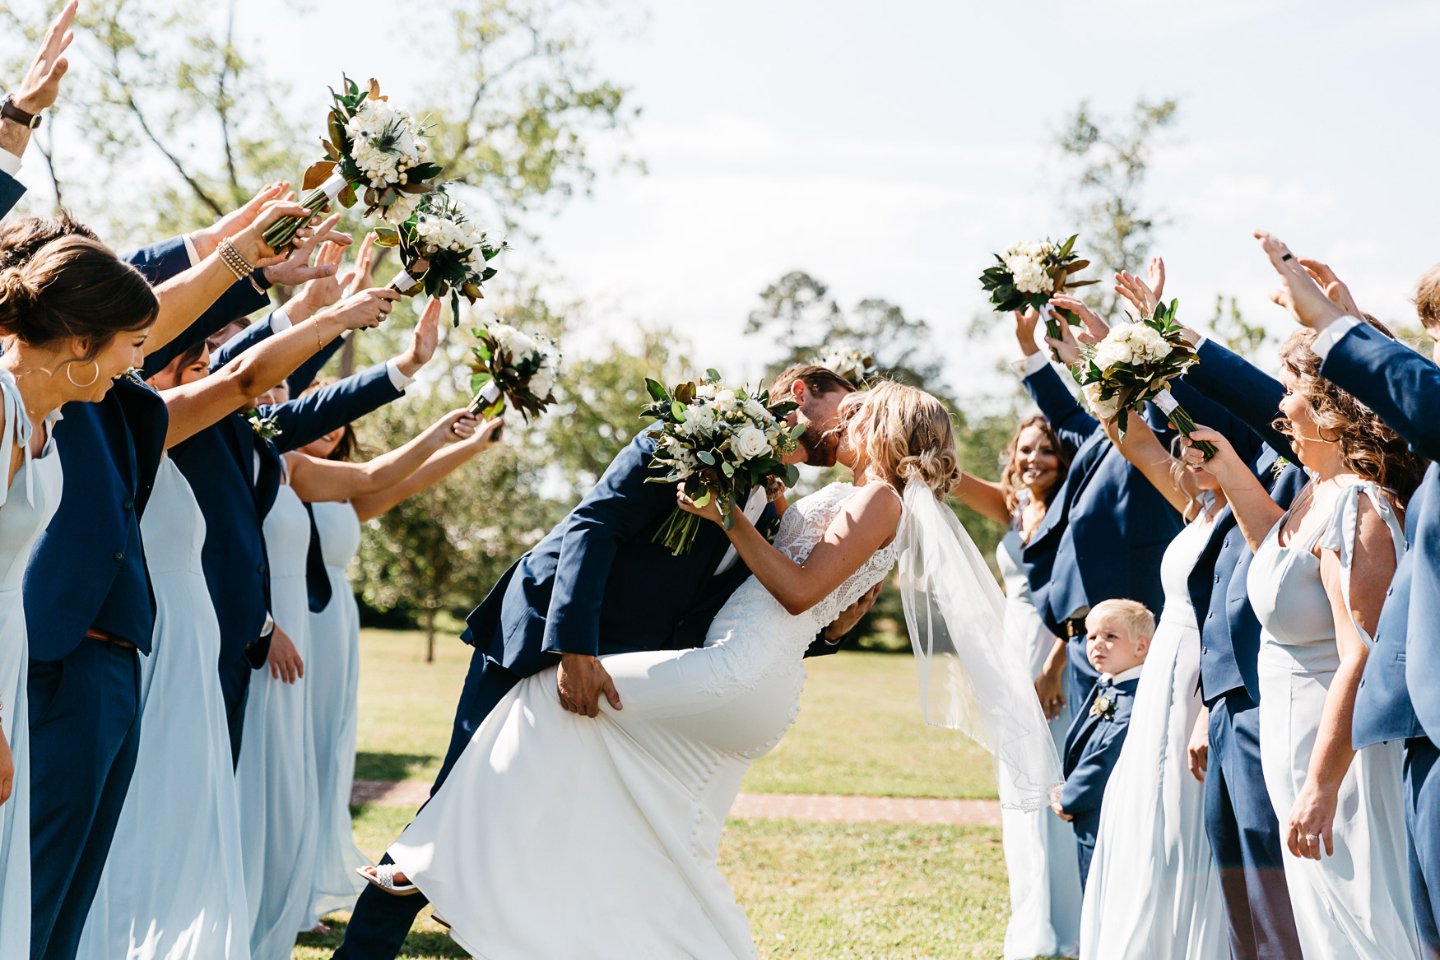 #SomethingBlue and getting swept up in you!⁠
When the &ldquo;SomethingBlue&rdquo; is your wedding color, you&rsquo;re automatically winning!⁠
Reagan + Joshua
@MarkWilliamsStudios
#WeddingTrends #SeasonalStyle #DutchFordTrendspotting